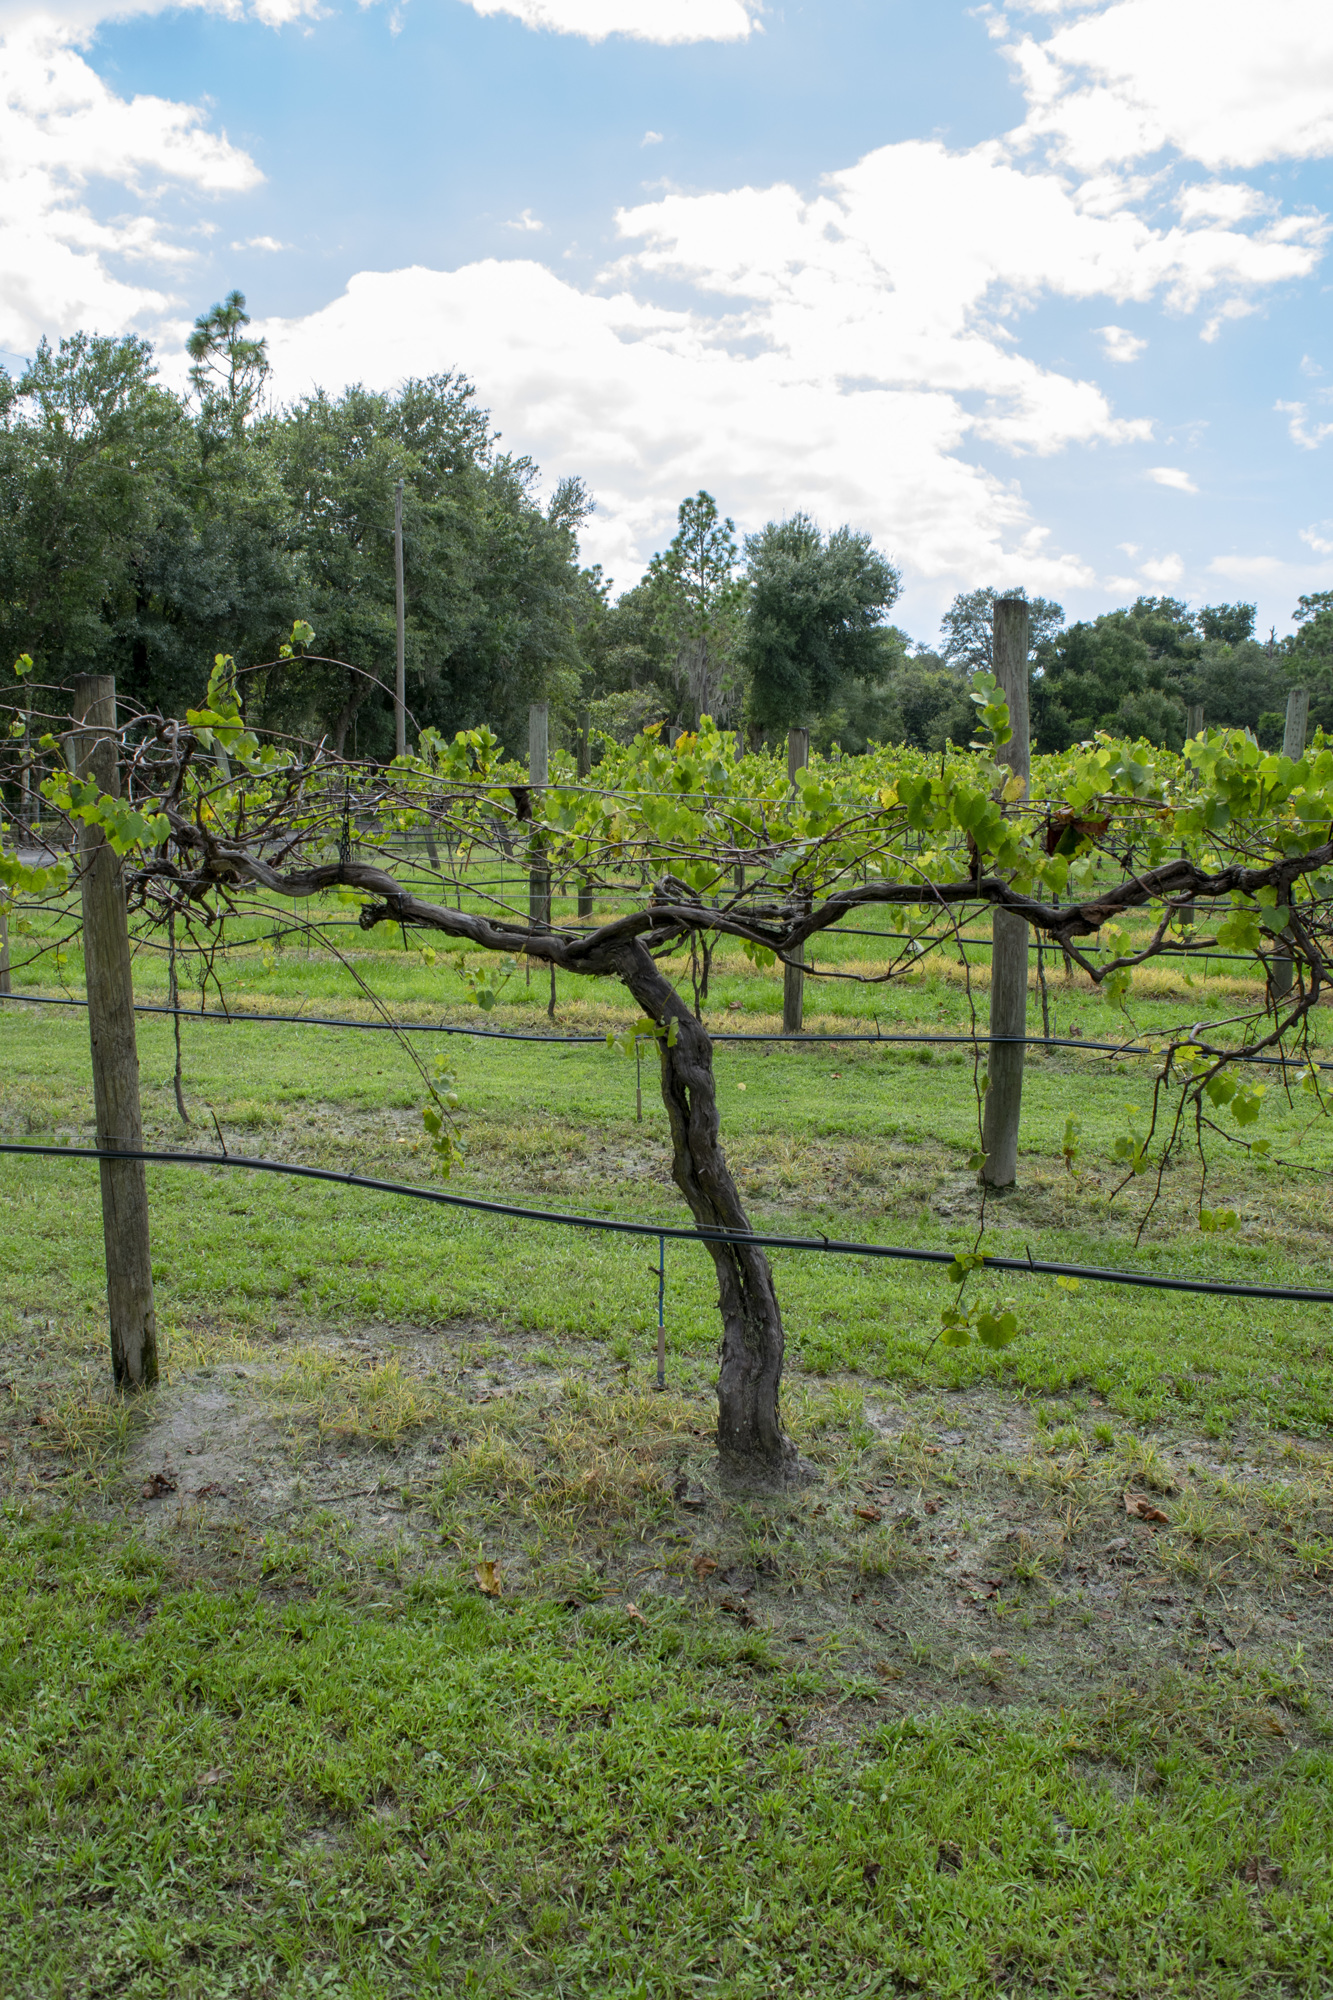 The Grand Papi: One of the oldest vines at the vineyard, “Gran Papi” is rumored to be the first vine planted on the property by Antonio Fiorelli and is estimated to be about 23 years old. Although the elder still produces grapes,